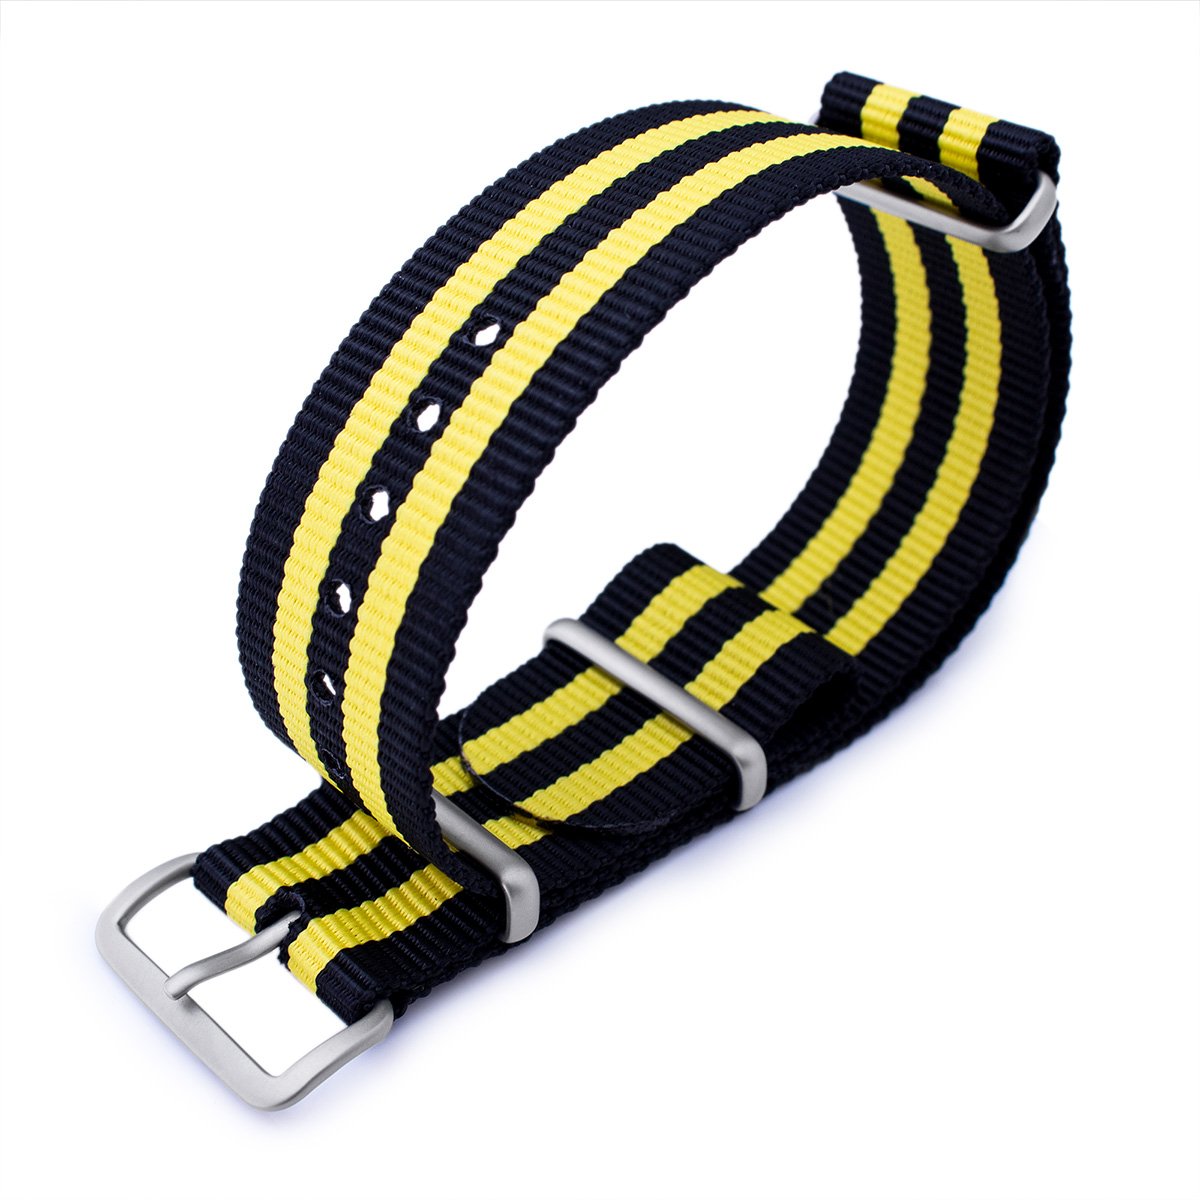 MiLTAT 20mm or 22mm G10 military watch strap ballistic nylon armband Sandblasted Black &amp; Yellow Strapcode Watch Bands